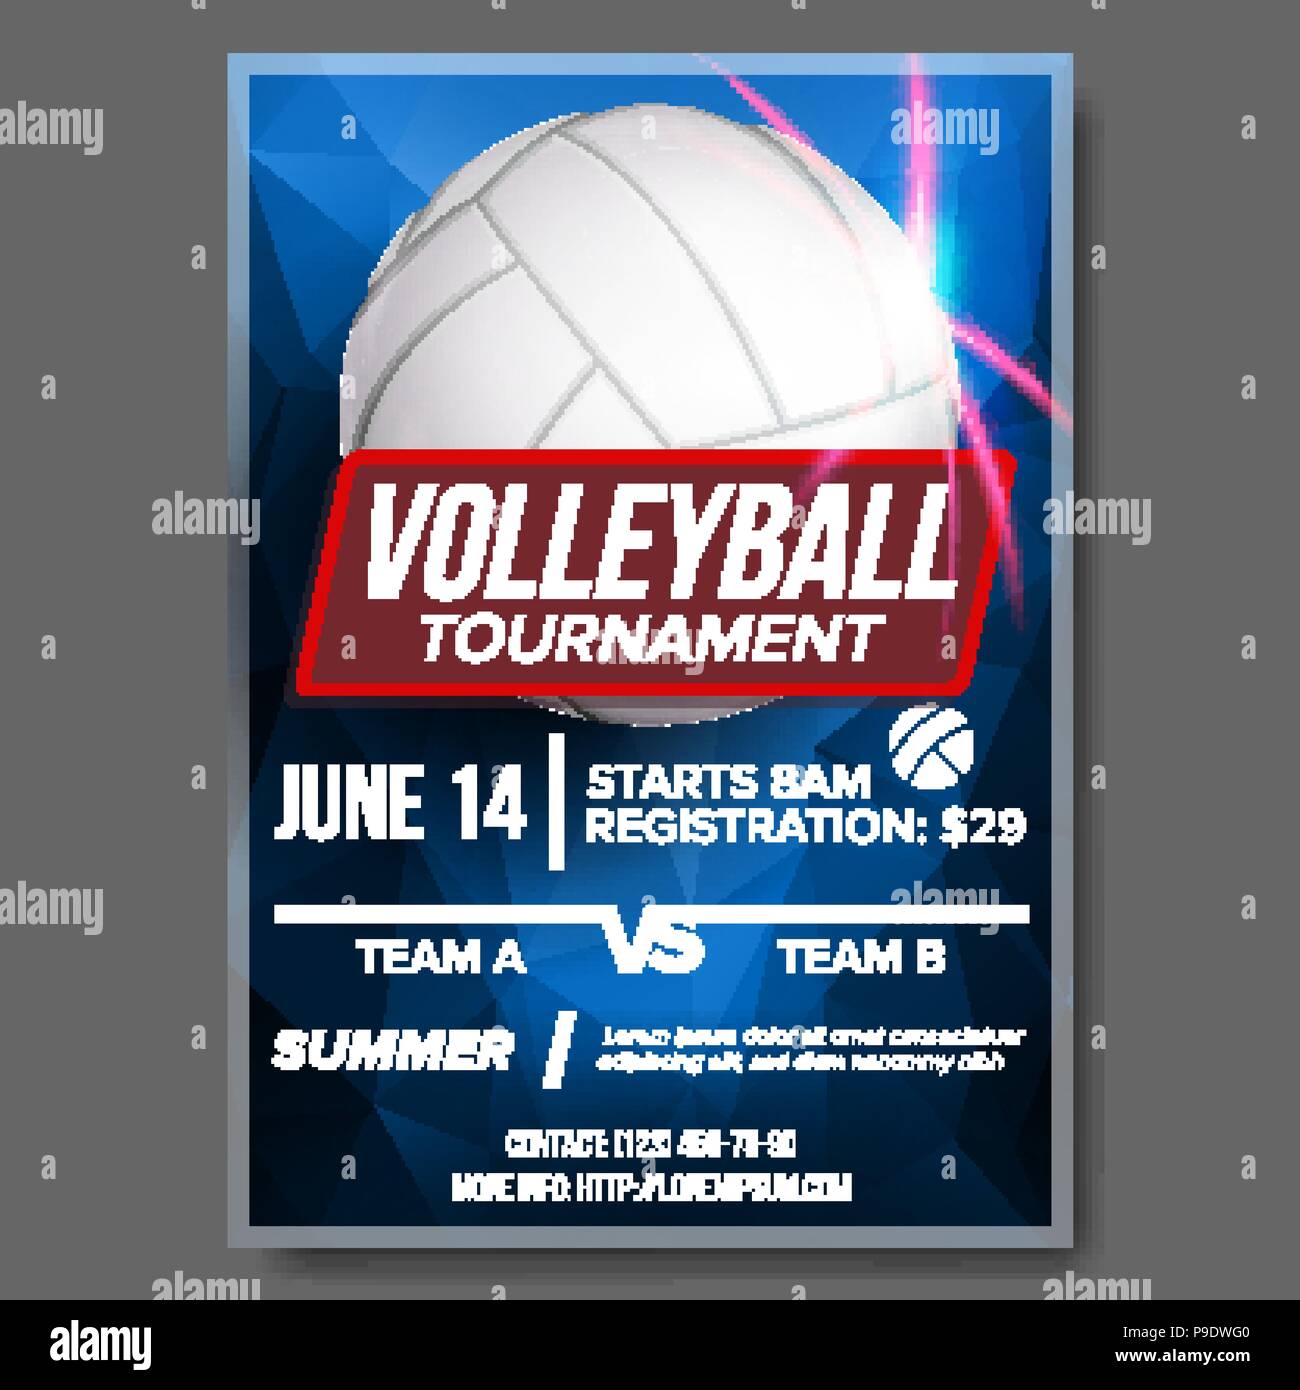 Volleyball Poster Vector. Sport Event Announcement. Ball. Banner Advertising. Event Promo. Template Design. Professional League. Summer Game. Volley. A4 Size Event Illustration Stock Vector